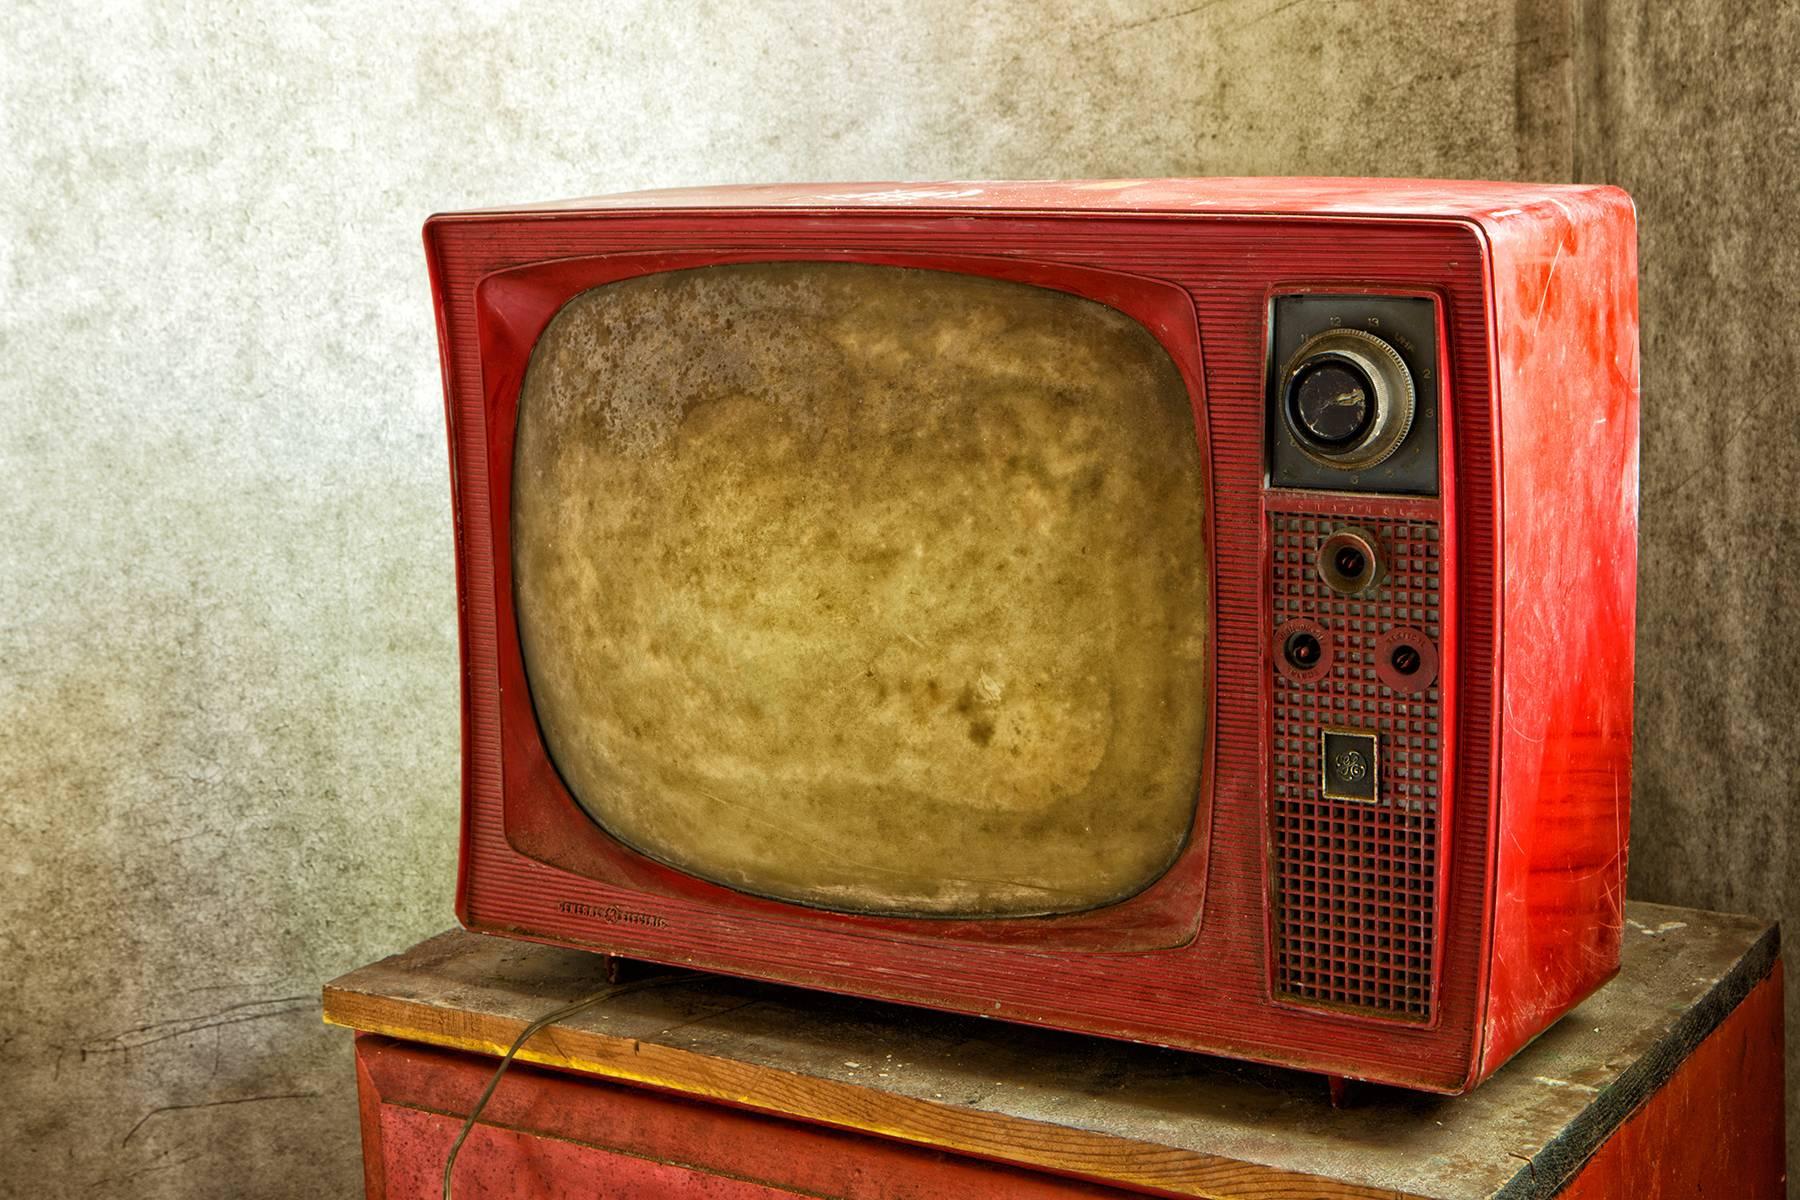 Rebecca Skinner’s “Aged #2” is a 30 x 40 inch metal print and is part of her “Transient” series. The close up color photograph is of a bright red vintage television abandoned long ago. The frameless print has a satin finish is infused directly into